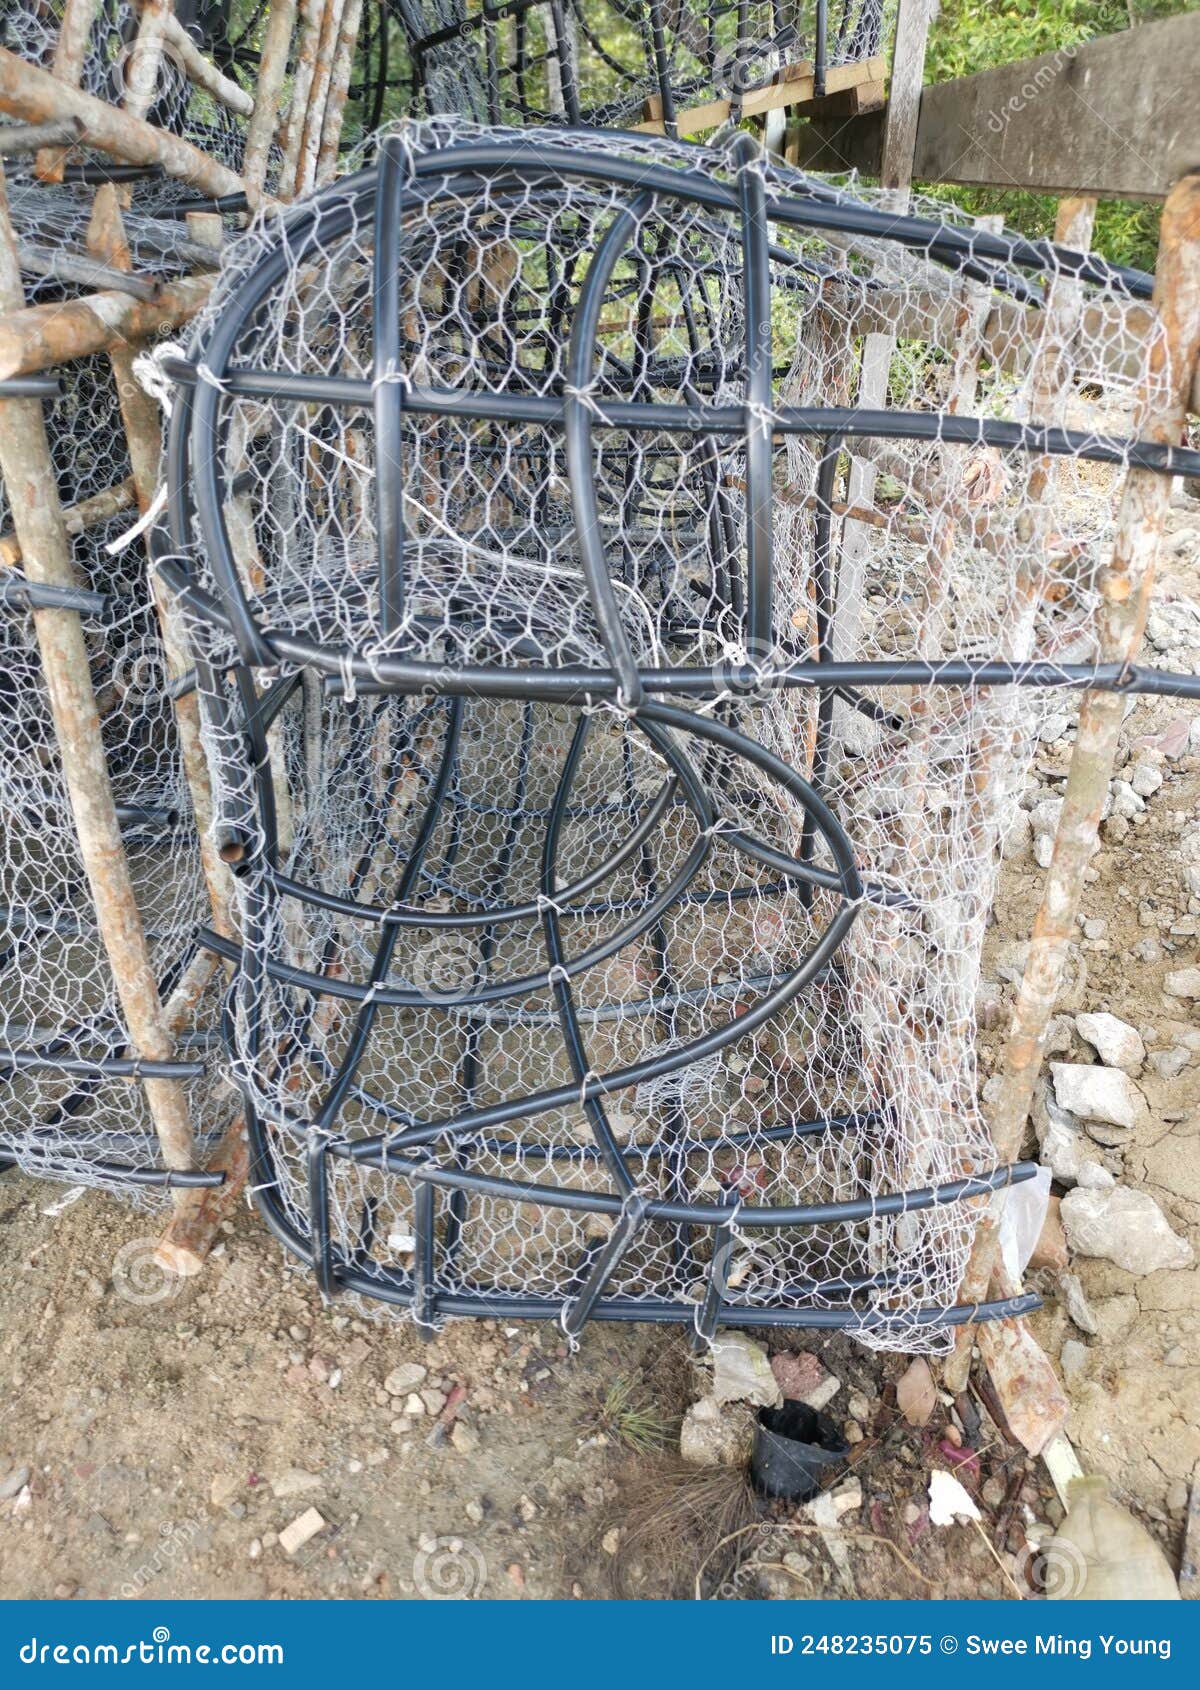 Outdoor Scene of the DIY Fish Trap Structure Make from Mangrove Wood,wire  and Polystyrene Pipe. Stock Image - Image of incarceration, geometric:  248235075